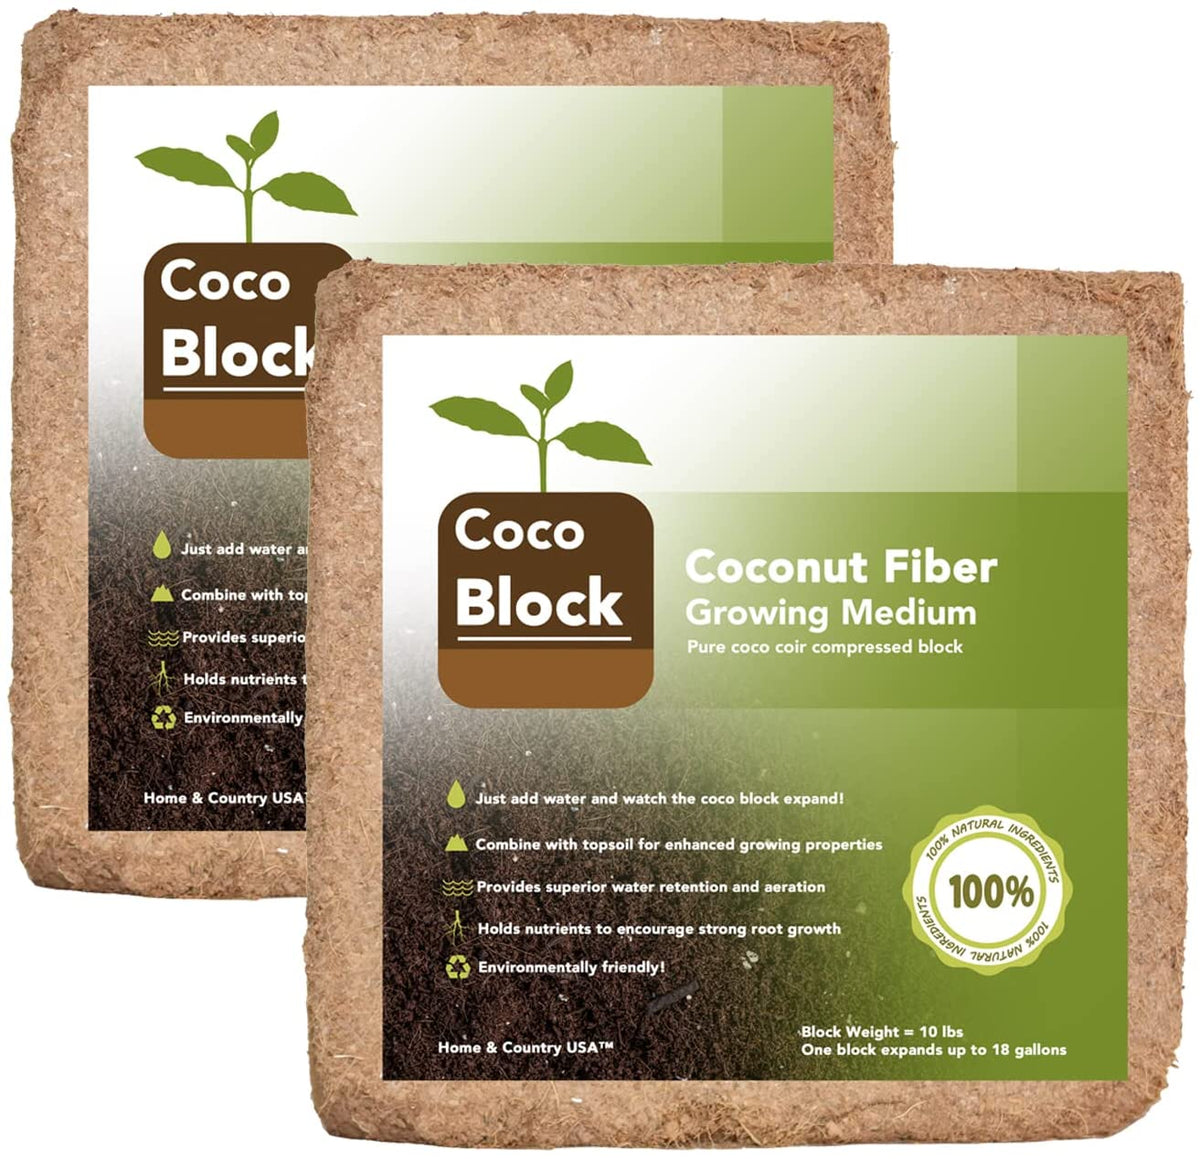 Is Coir an Eco-friendly Substitute for Peat Moss?